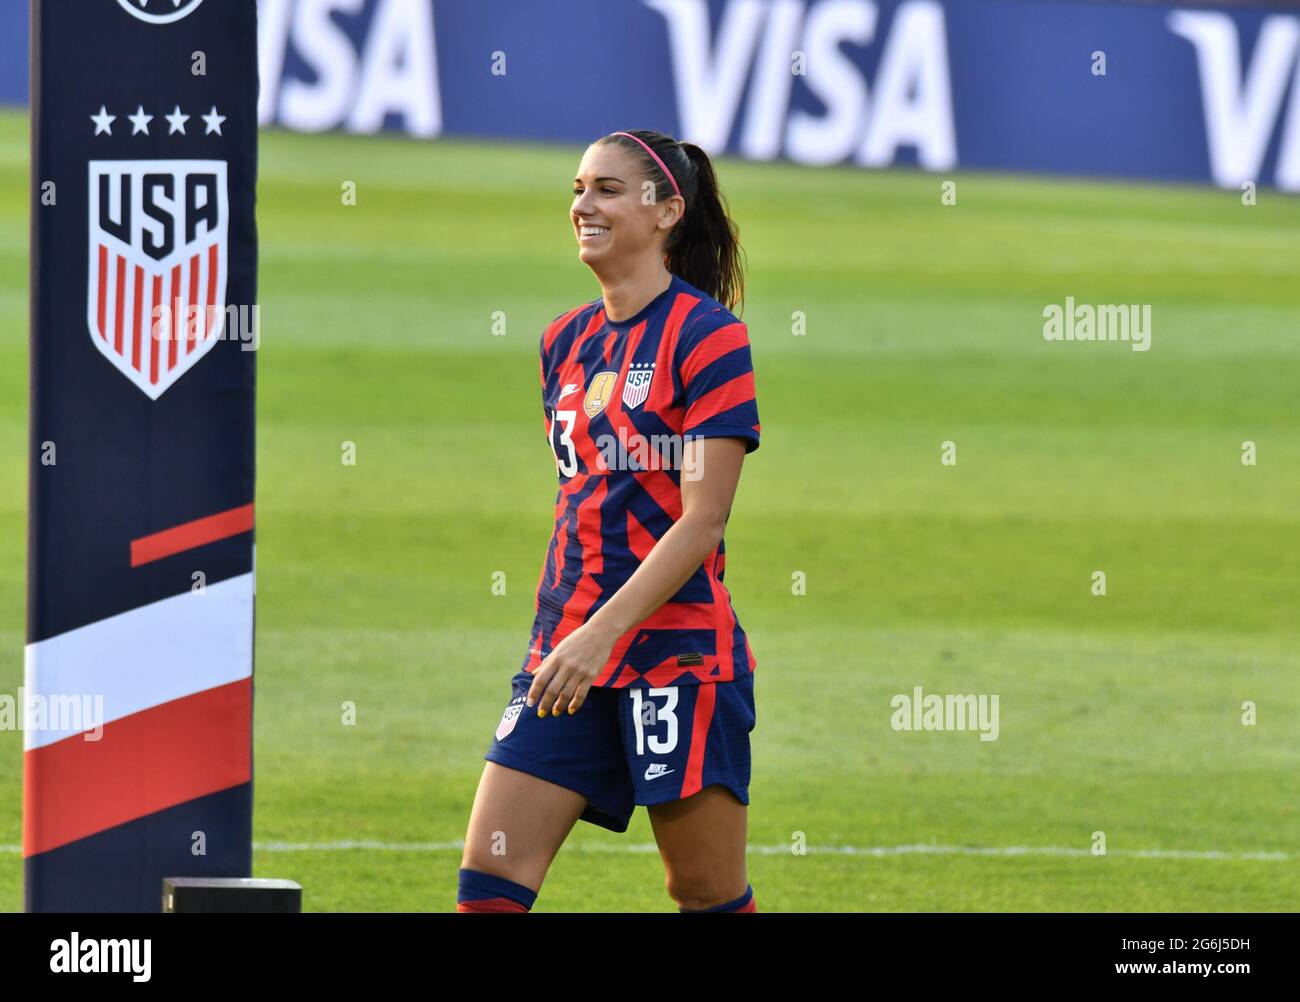 Connecticut, United States. 05/07/2021, Alex Morgan (13 USA) during the Send Off Series celebration after the International Women's match between United States and Mexico at Pratt & Whitney Stadium at Rentschler in East Hartford, Connecticut. Credit: SPP Sport Press Photo. /Alamy Live News Stock Photo